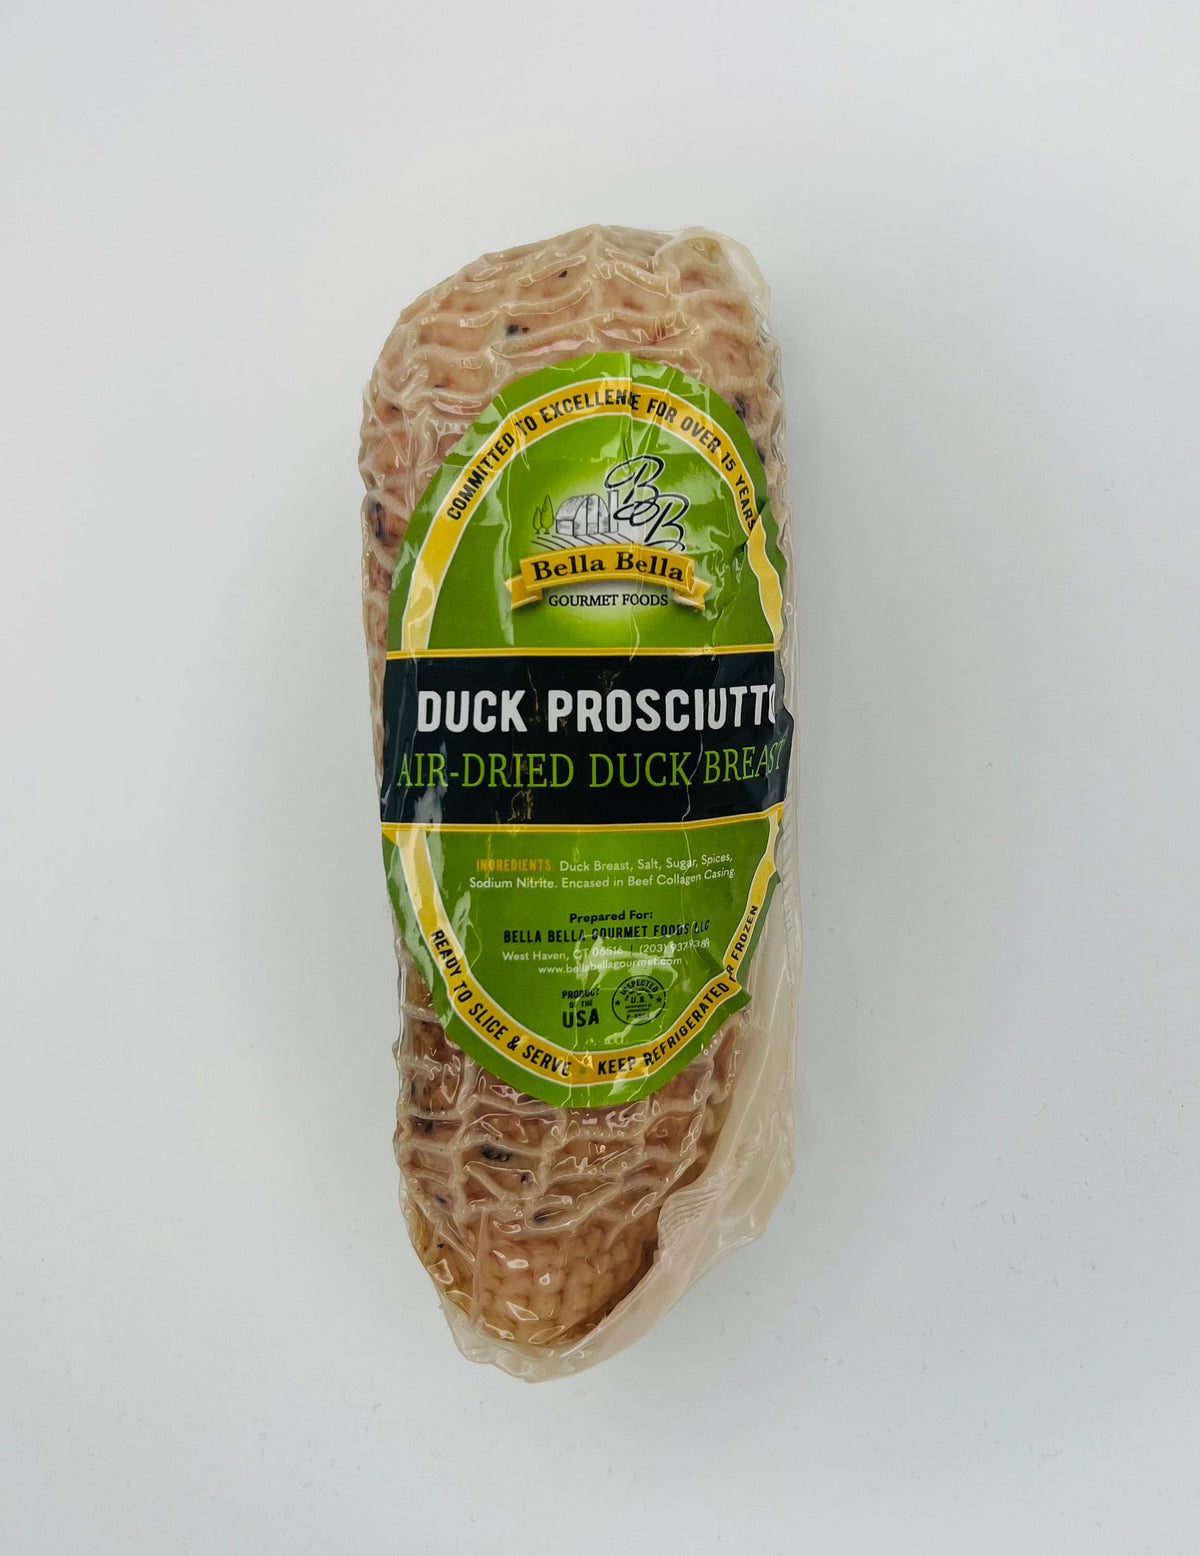 Duck Proscuitto 2 Styles to choose from!